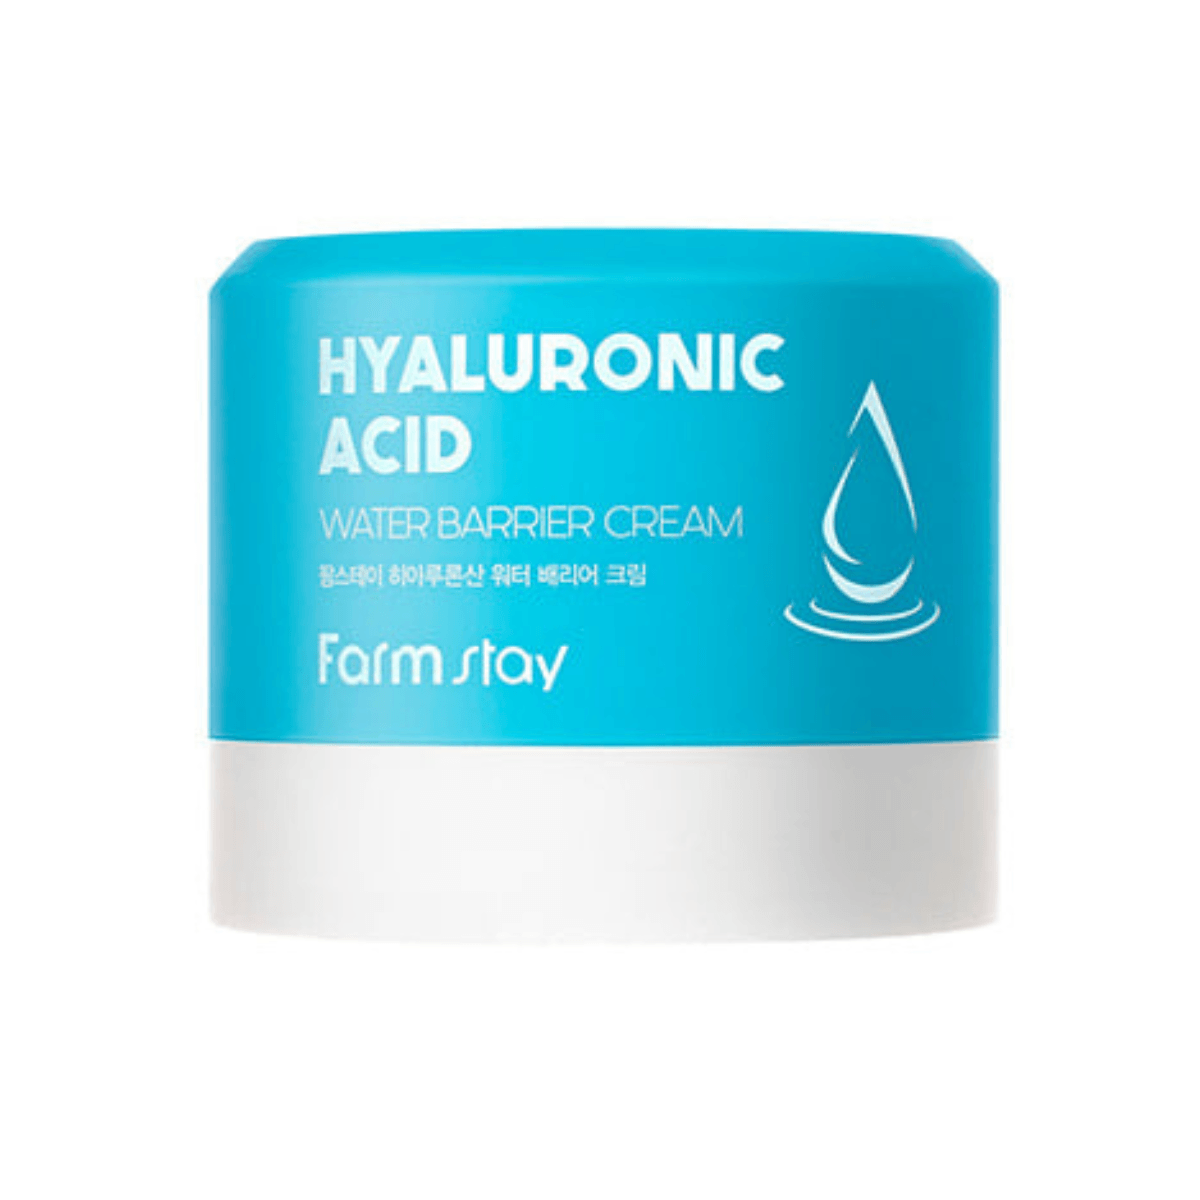 Farmstay Hyaluronic Acid Water Barrier Cream: Reduces wrinkles, brightens skin, improves moisture, soothes skin.